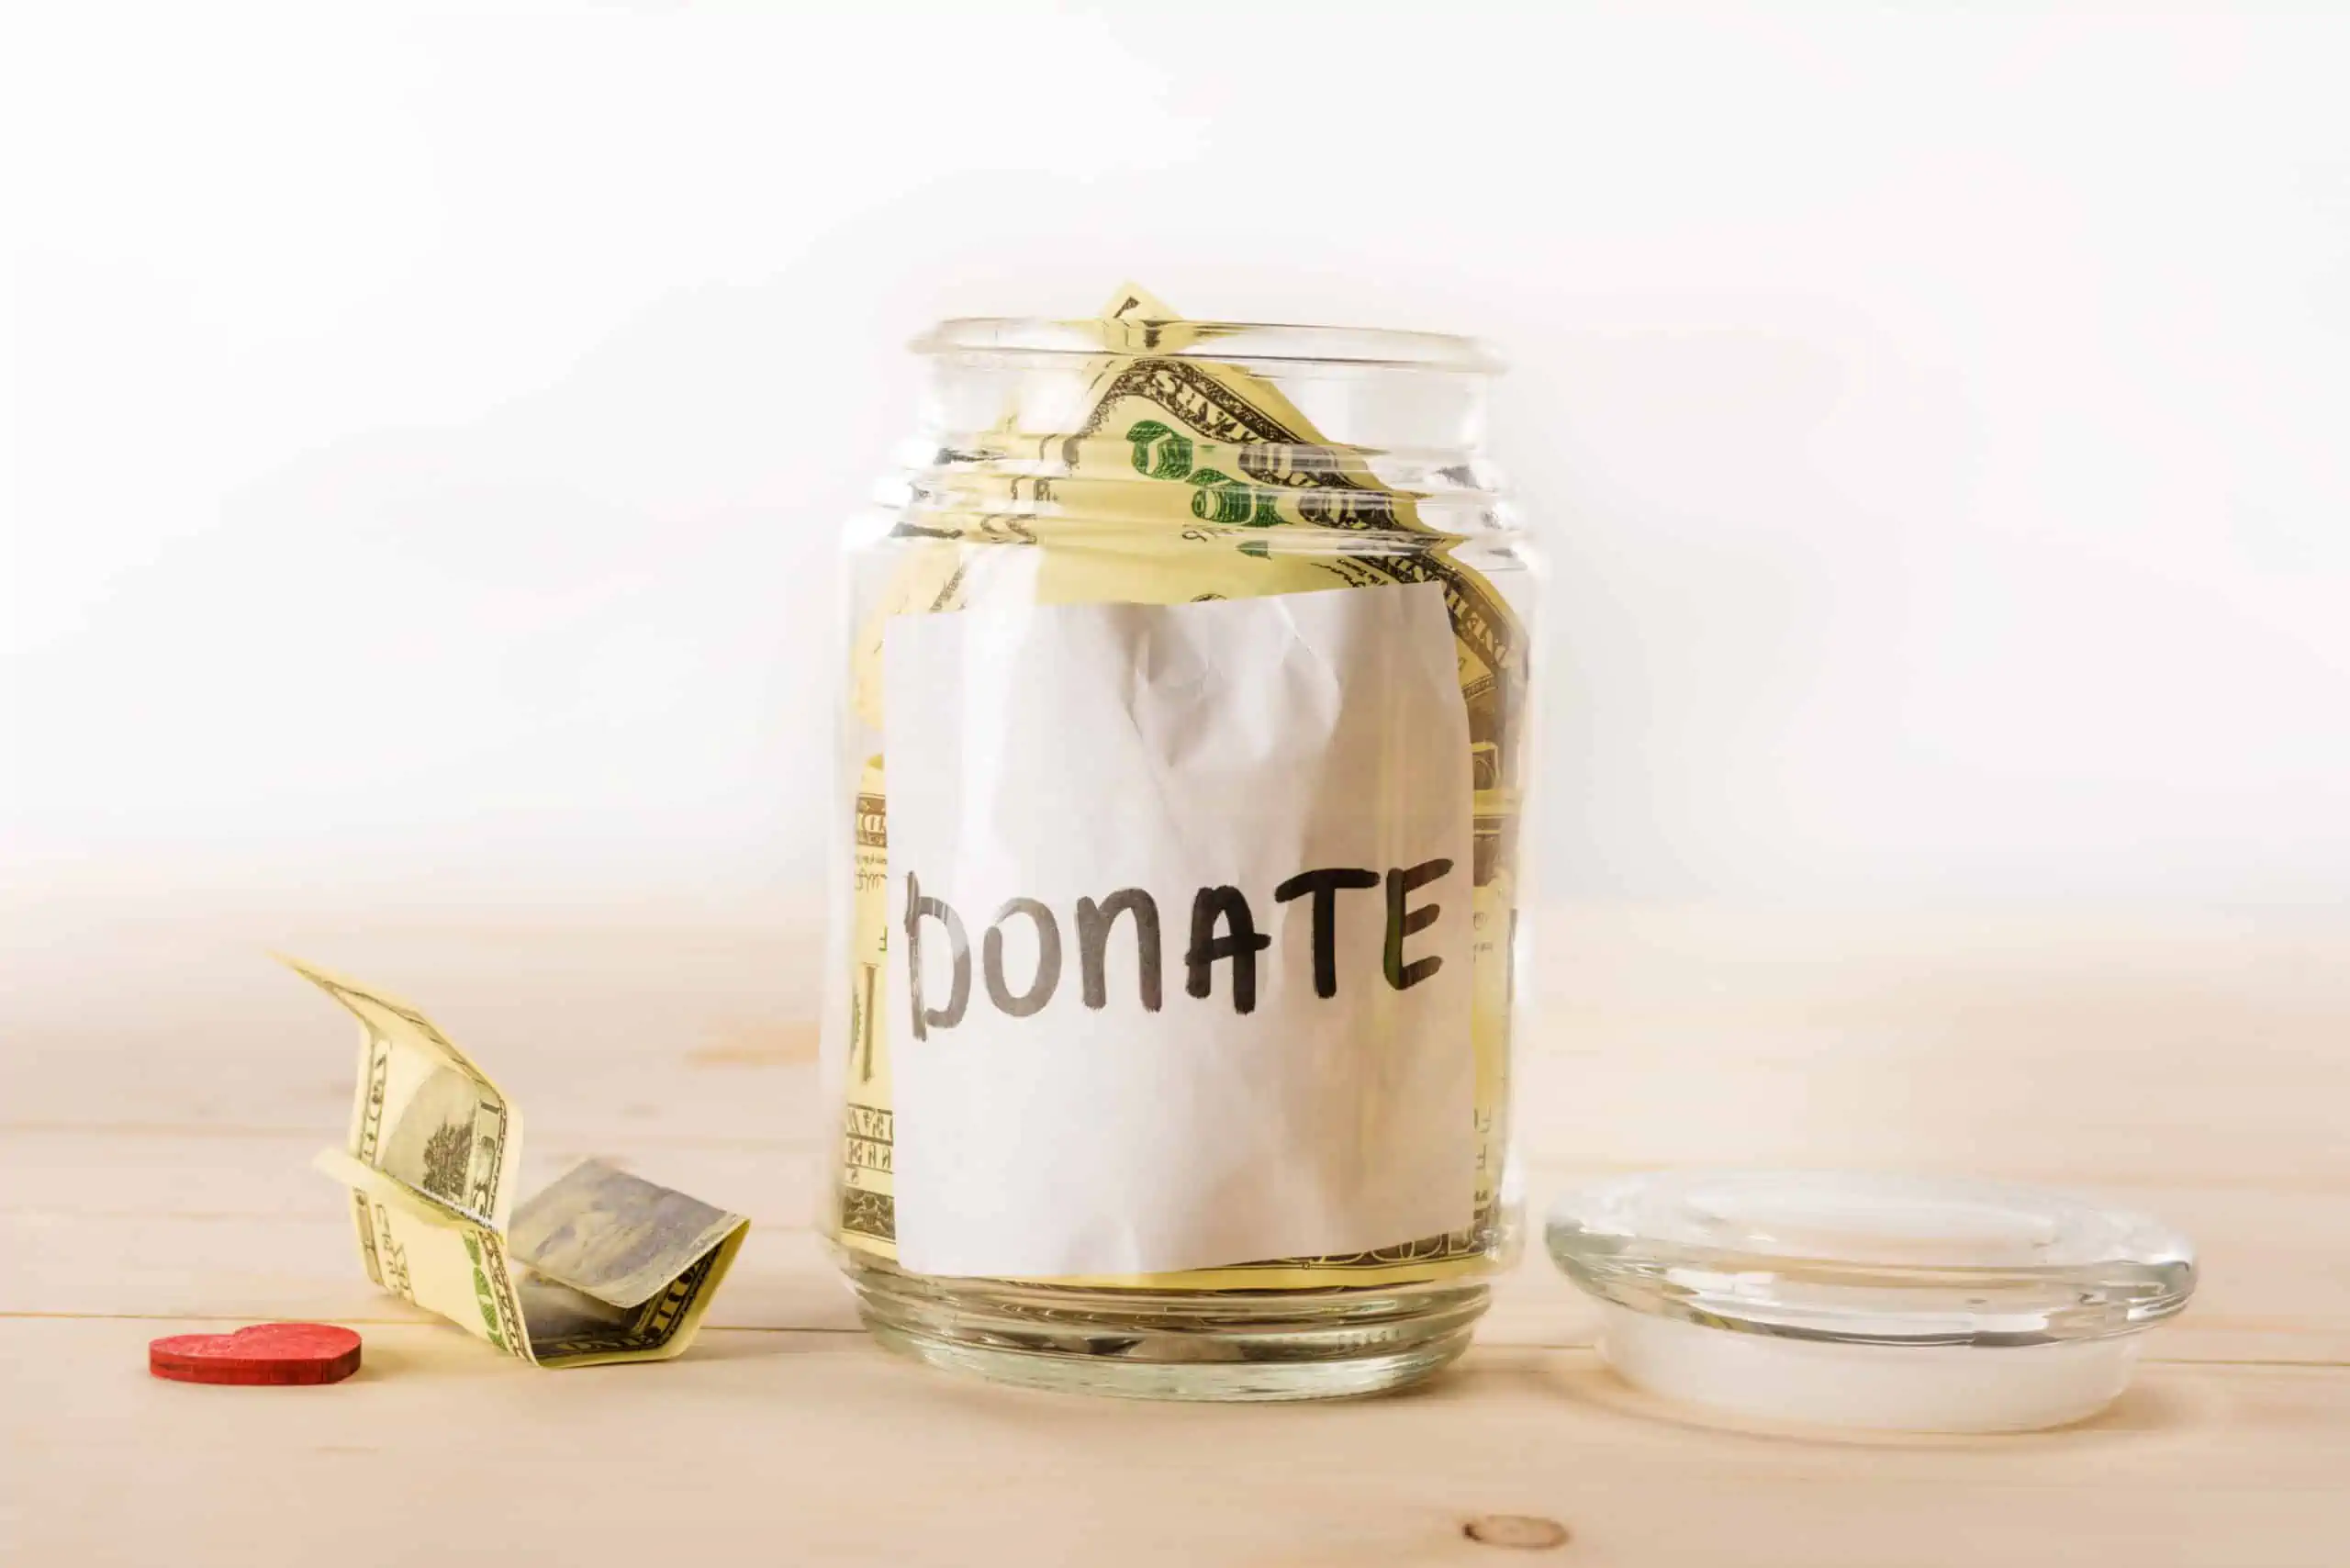 Glass jar with white "Donate" label stuffed with $100 bills to make charitable contributions